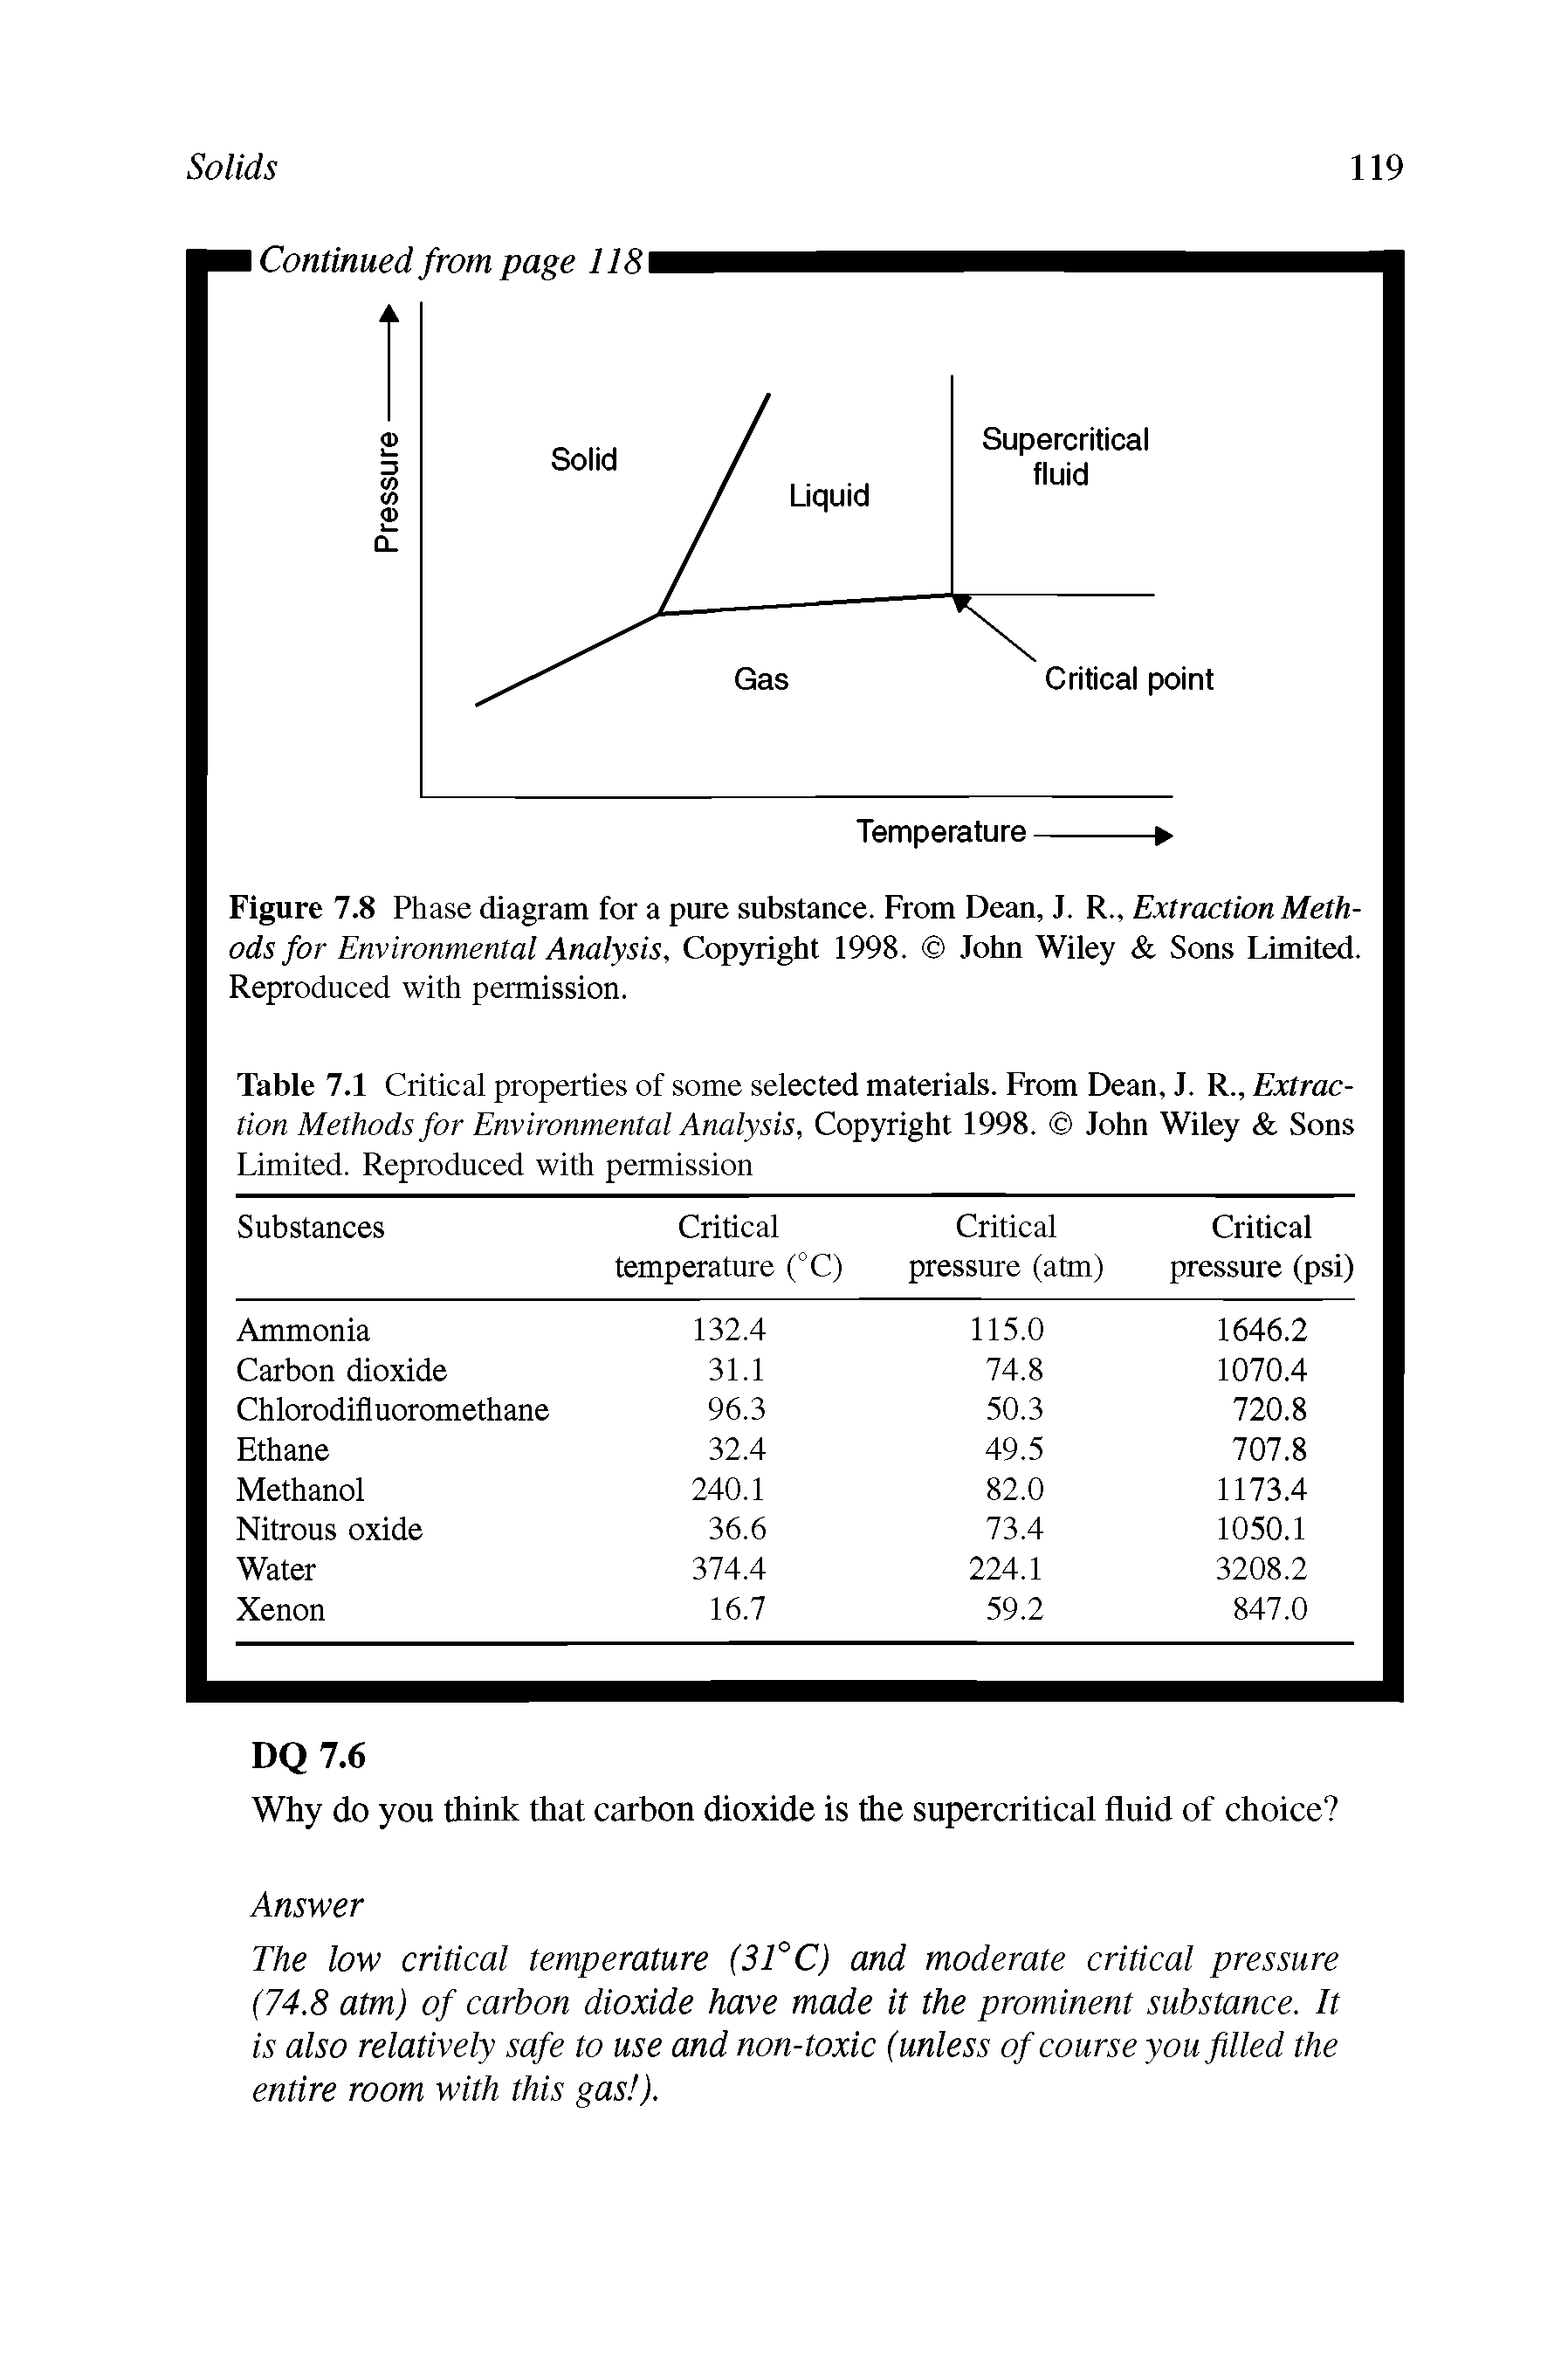 Figure 7.8 Phase diagram for a pure substance. From Dean, J. R., Extraction Methods for Environmental Analysis, Copyright 1998. John Wiley Sons Limited. Reproduced with permission.